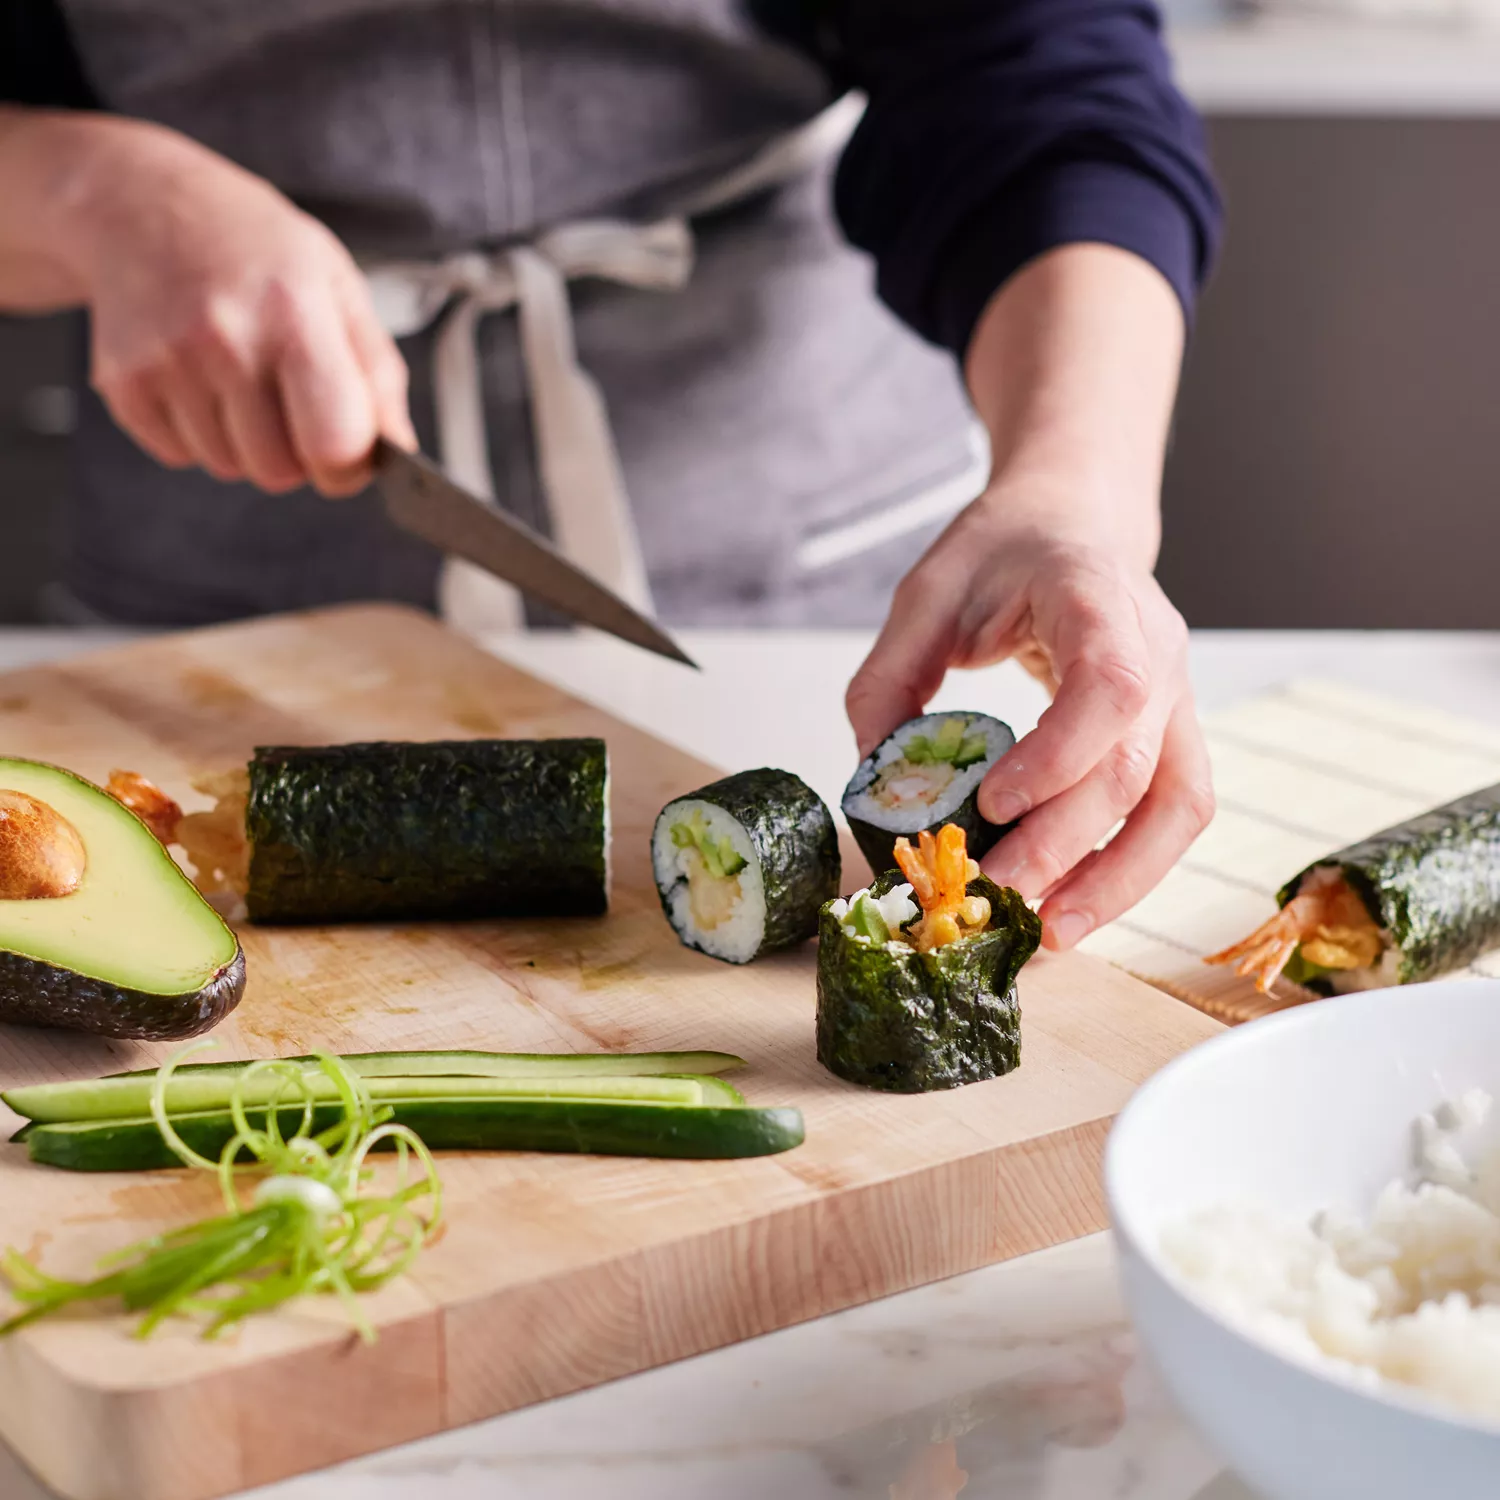 Cool Wares Sushi Making Tool Set | Makes Sushi Rolls Fun and Easy